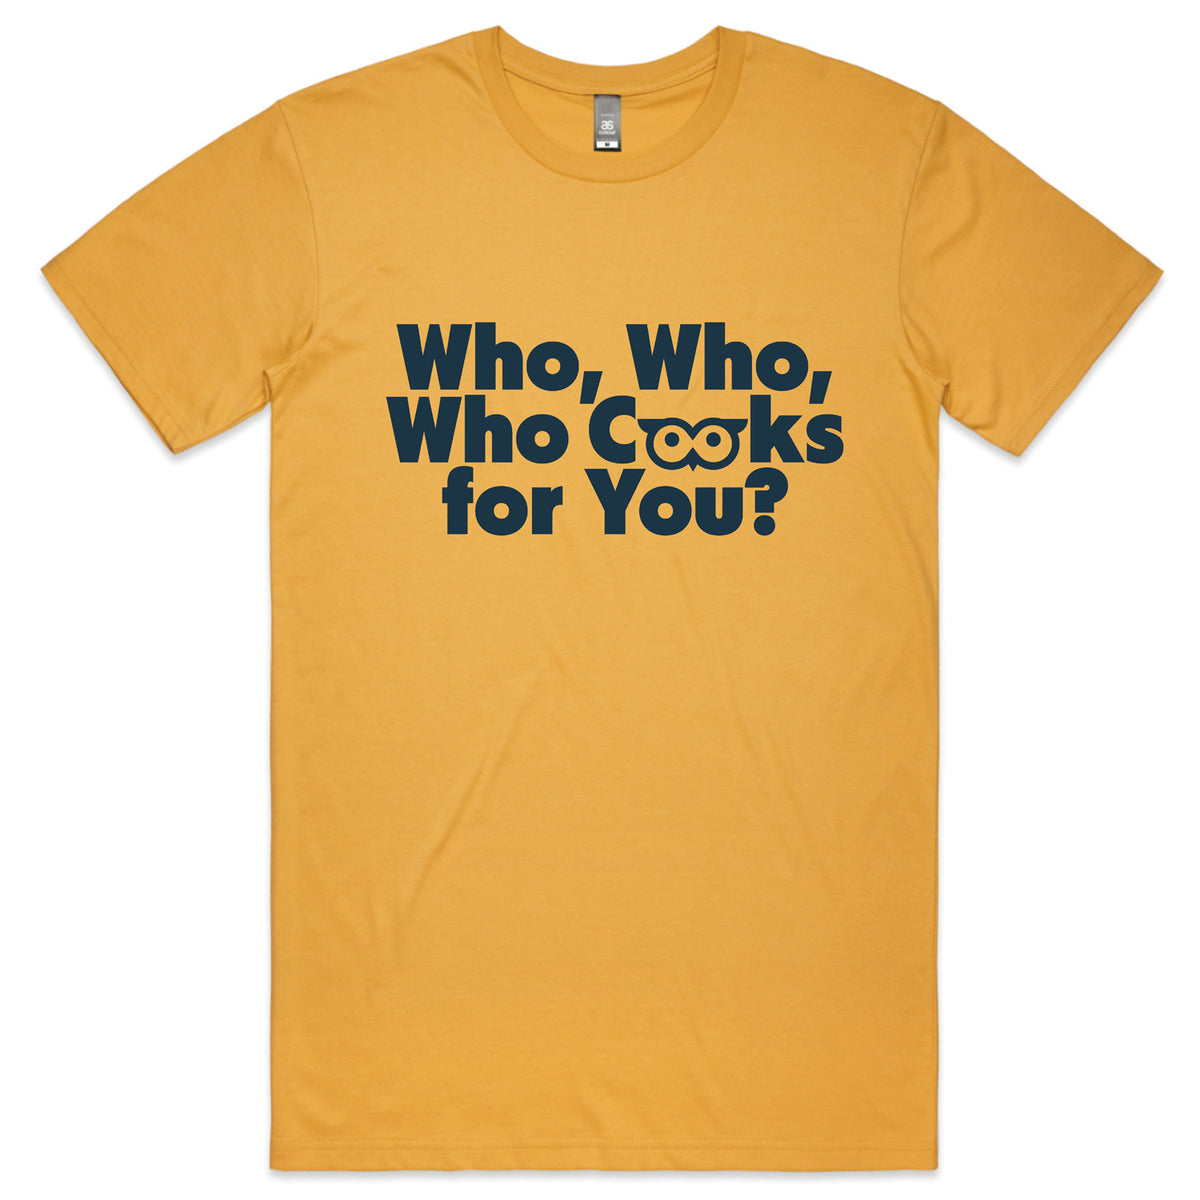 Who, Who, Who Cooks For You? T-shirt